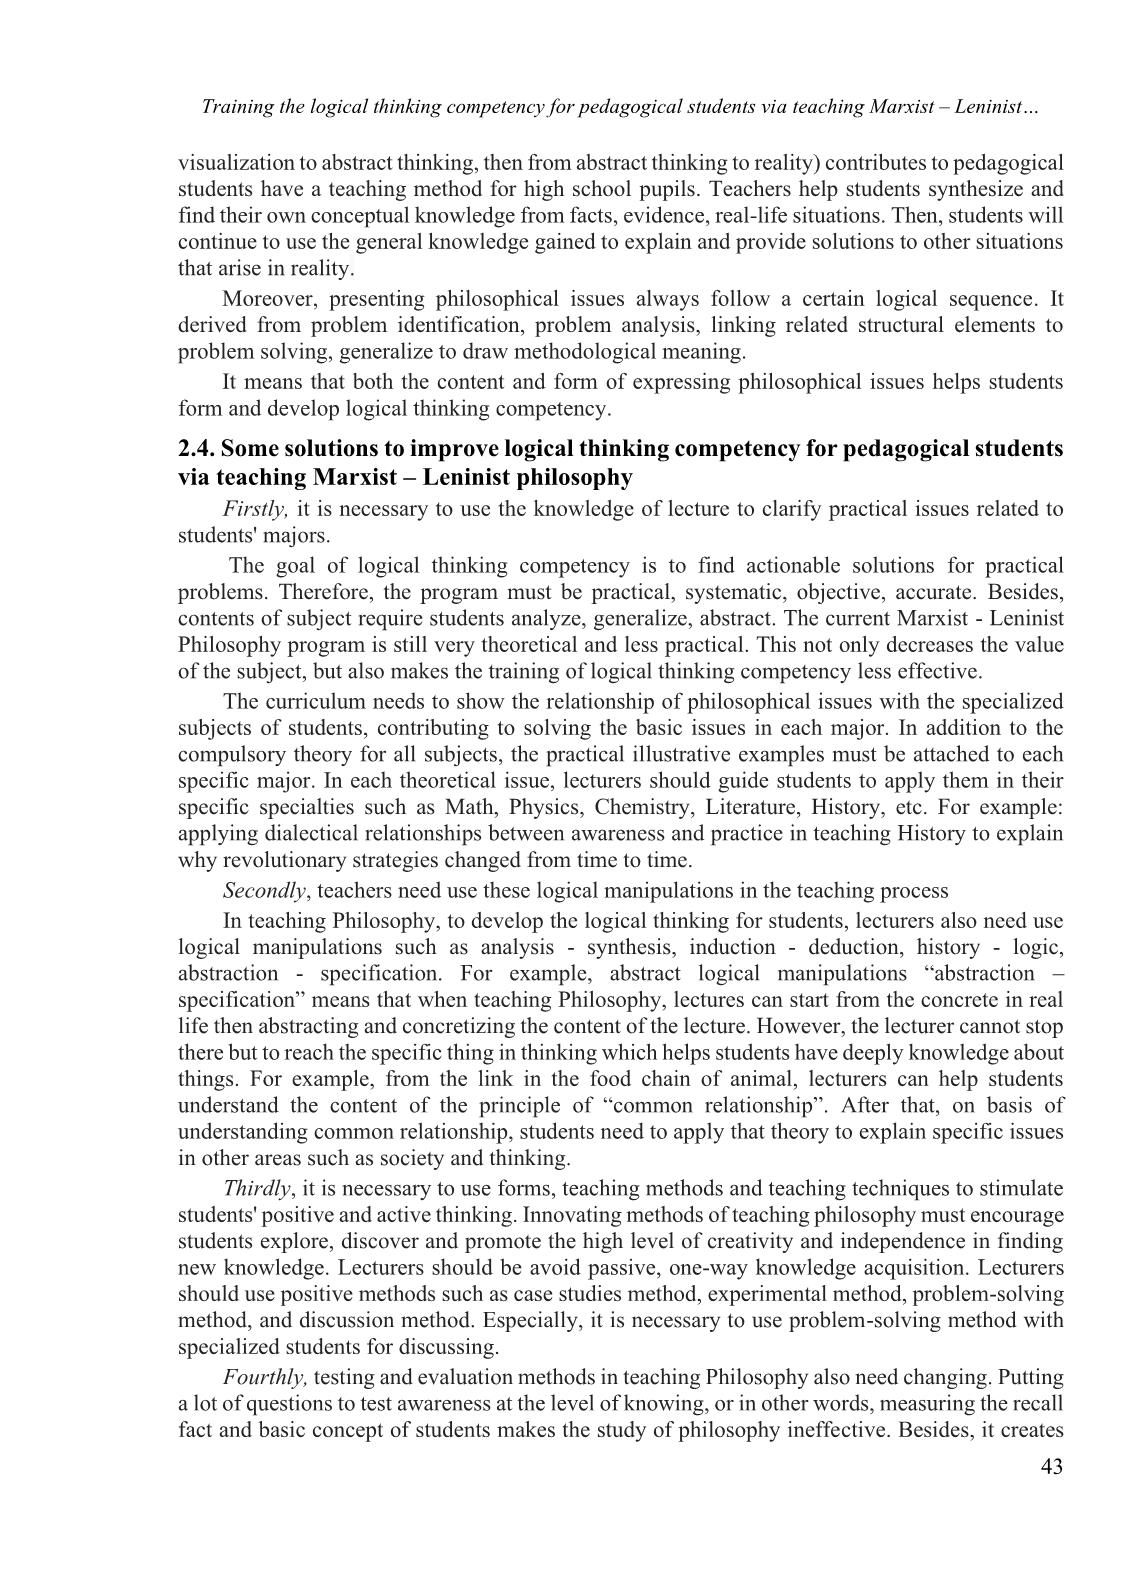 Training the logical thinking competency for pedagogical students via teaching Marxist – Leninist philosophy trang 7